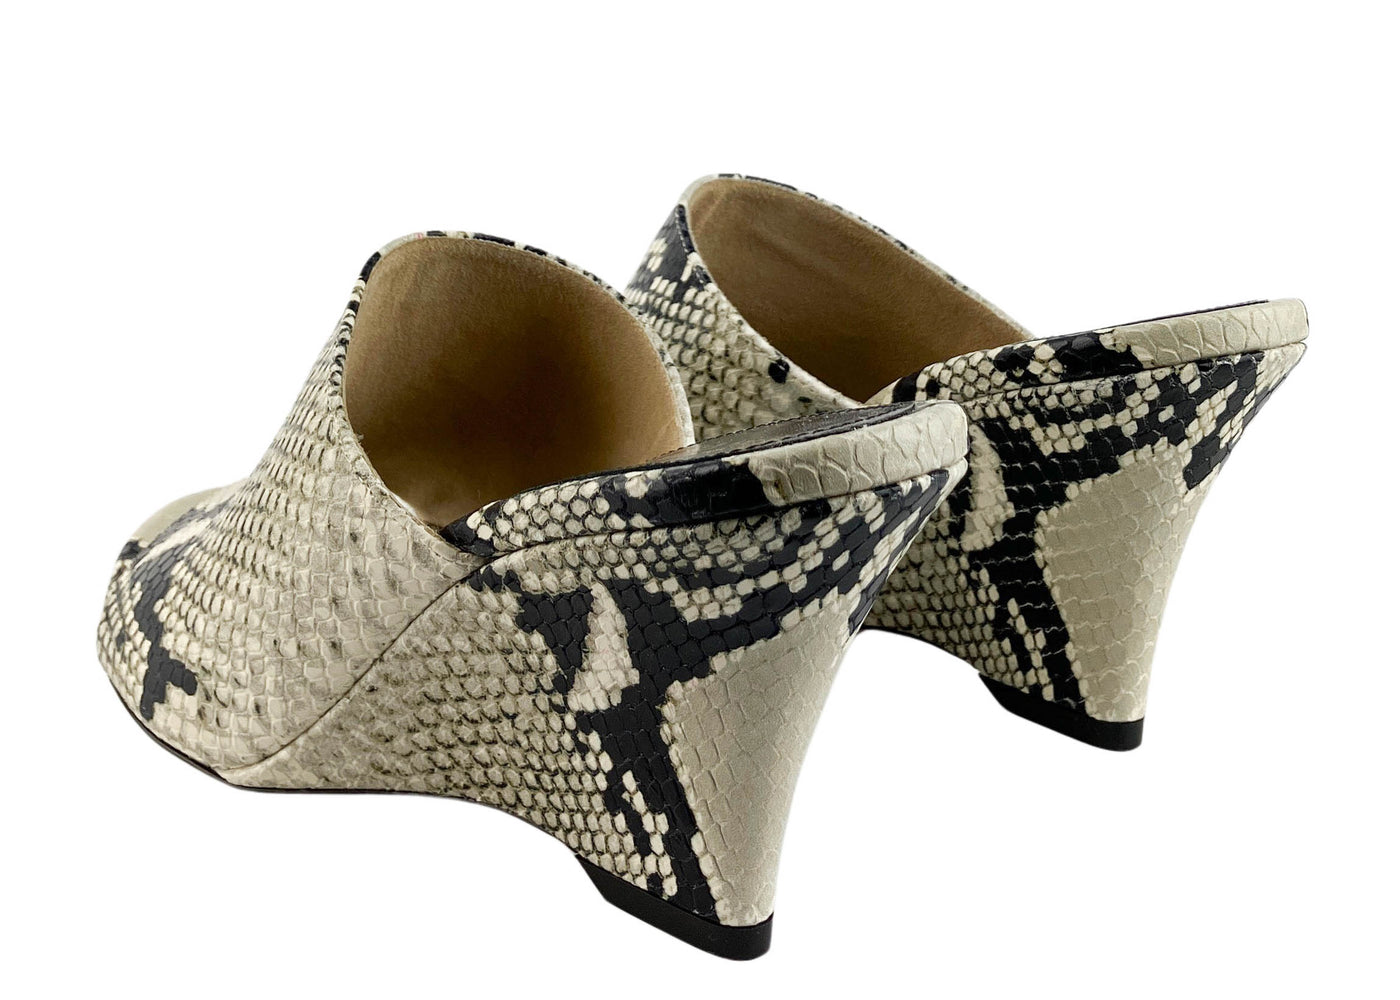 Khaite Marion Wedge Sandals in Natural - Discounts on Khaite at UAL